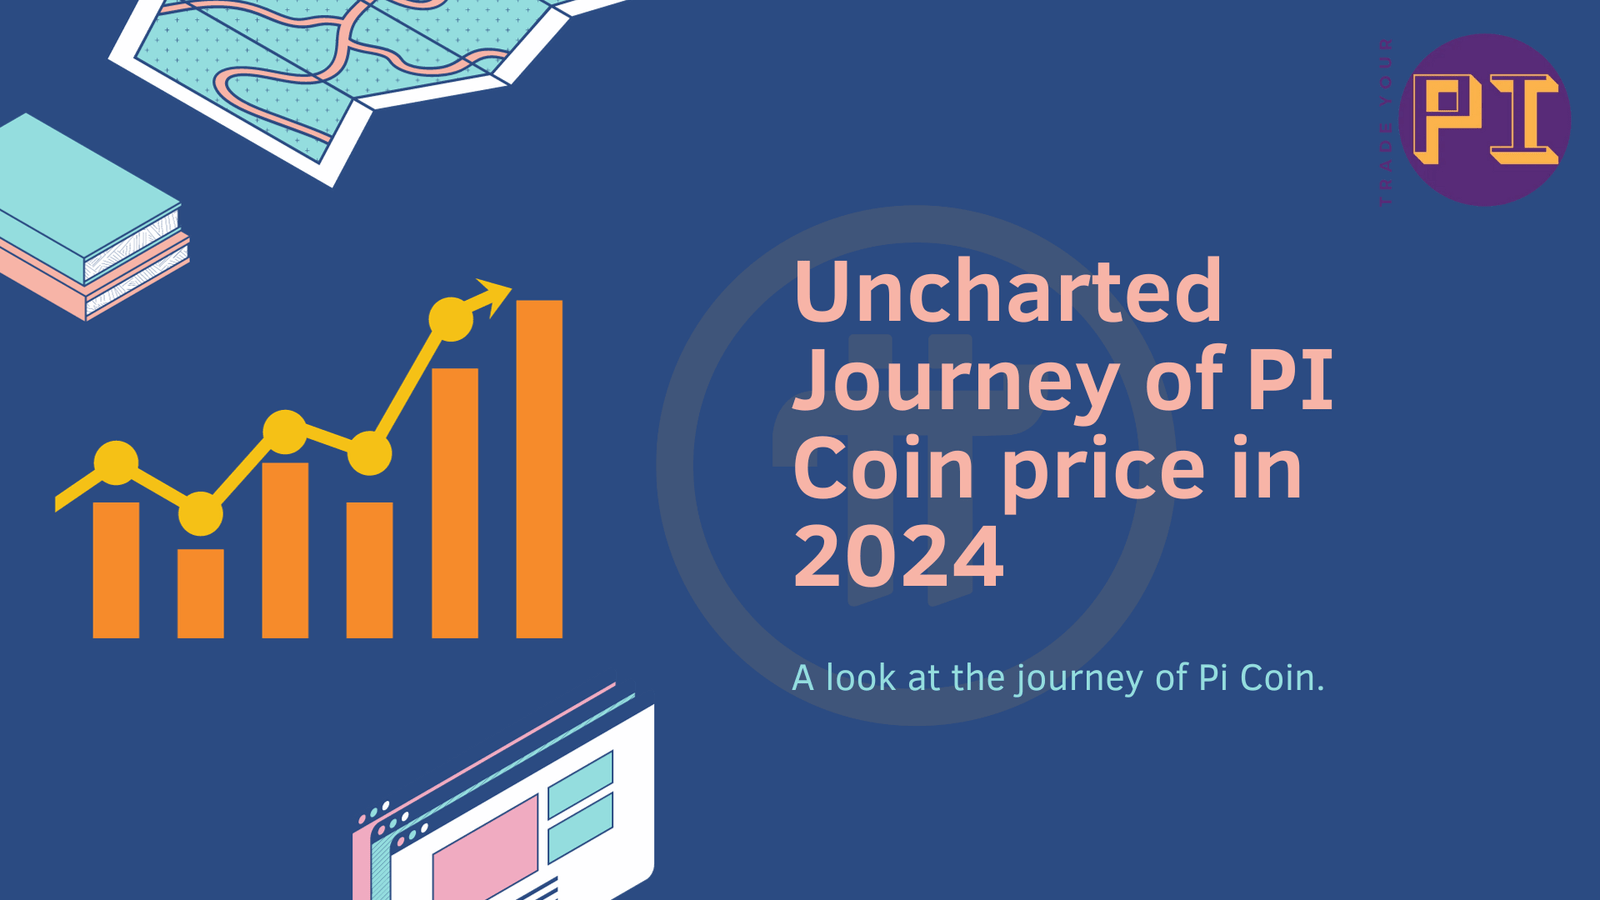 Uncharted Journey of PI Coin price in 2024